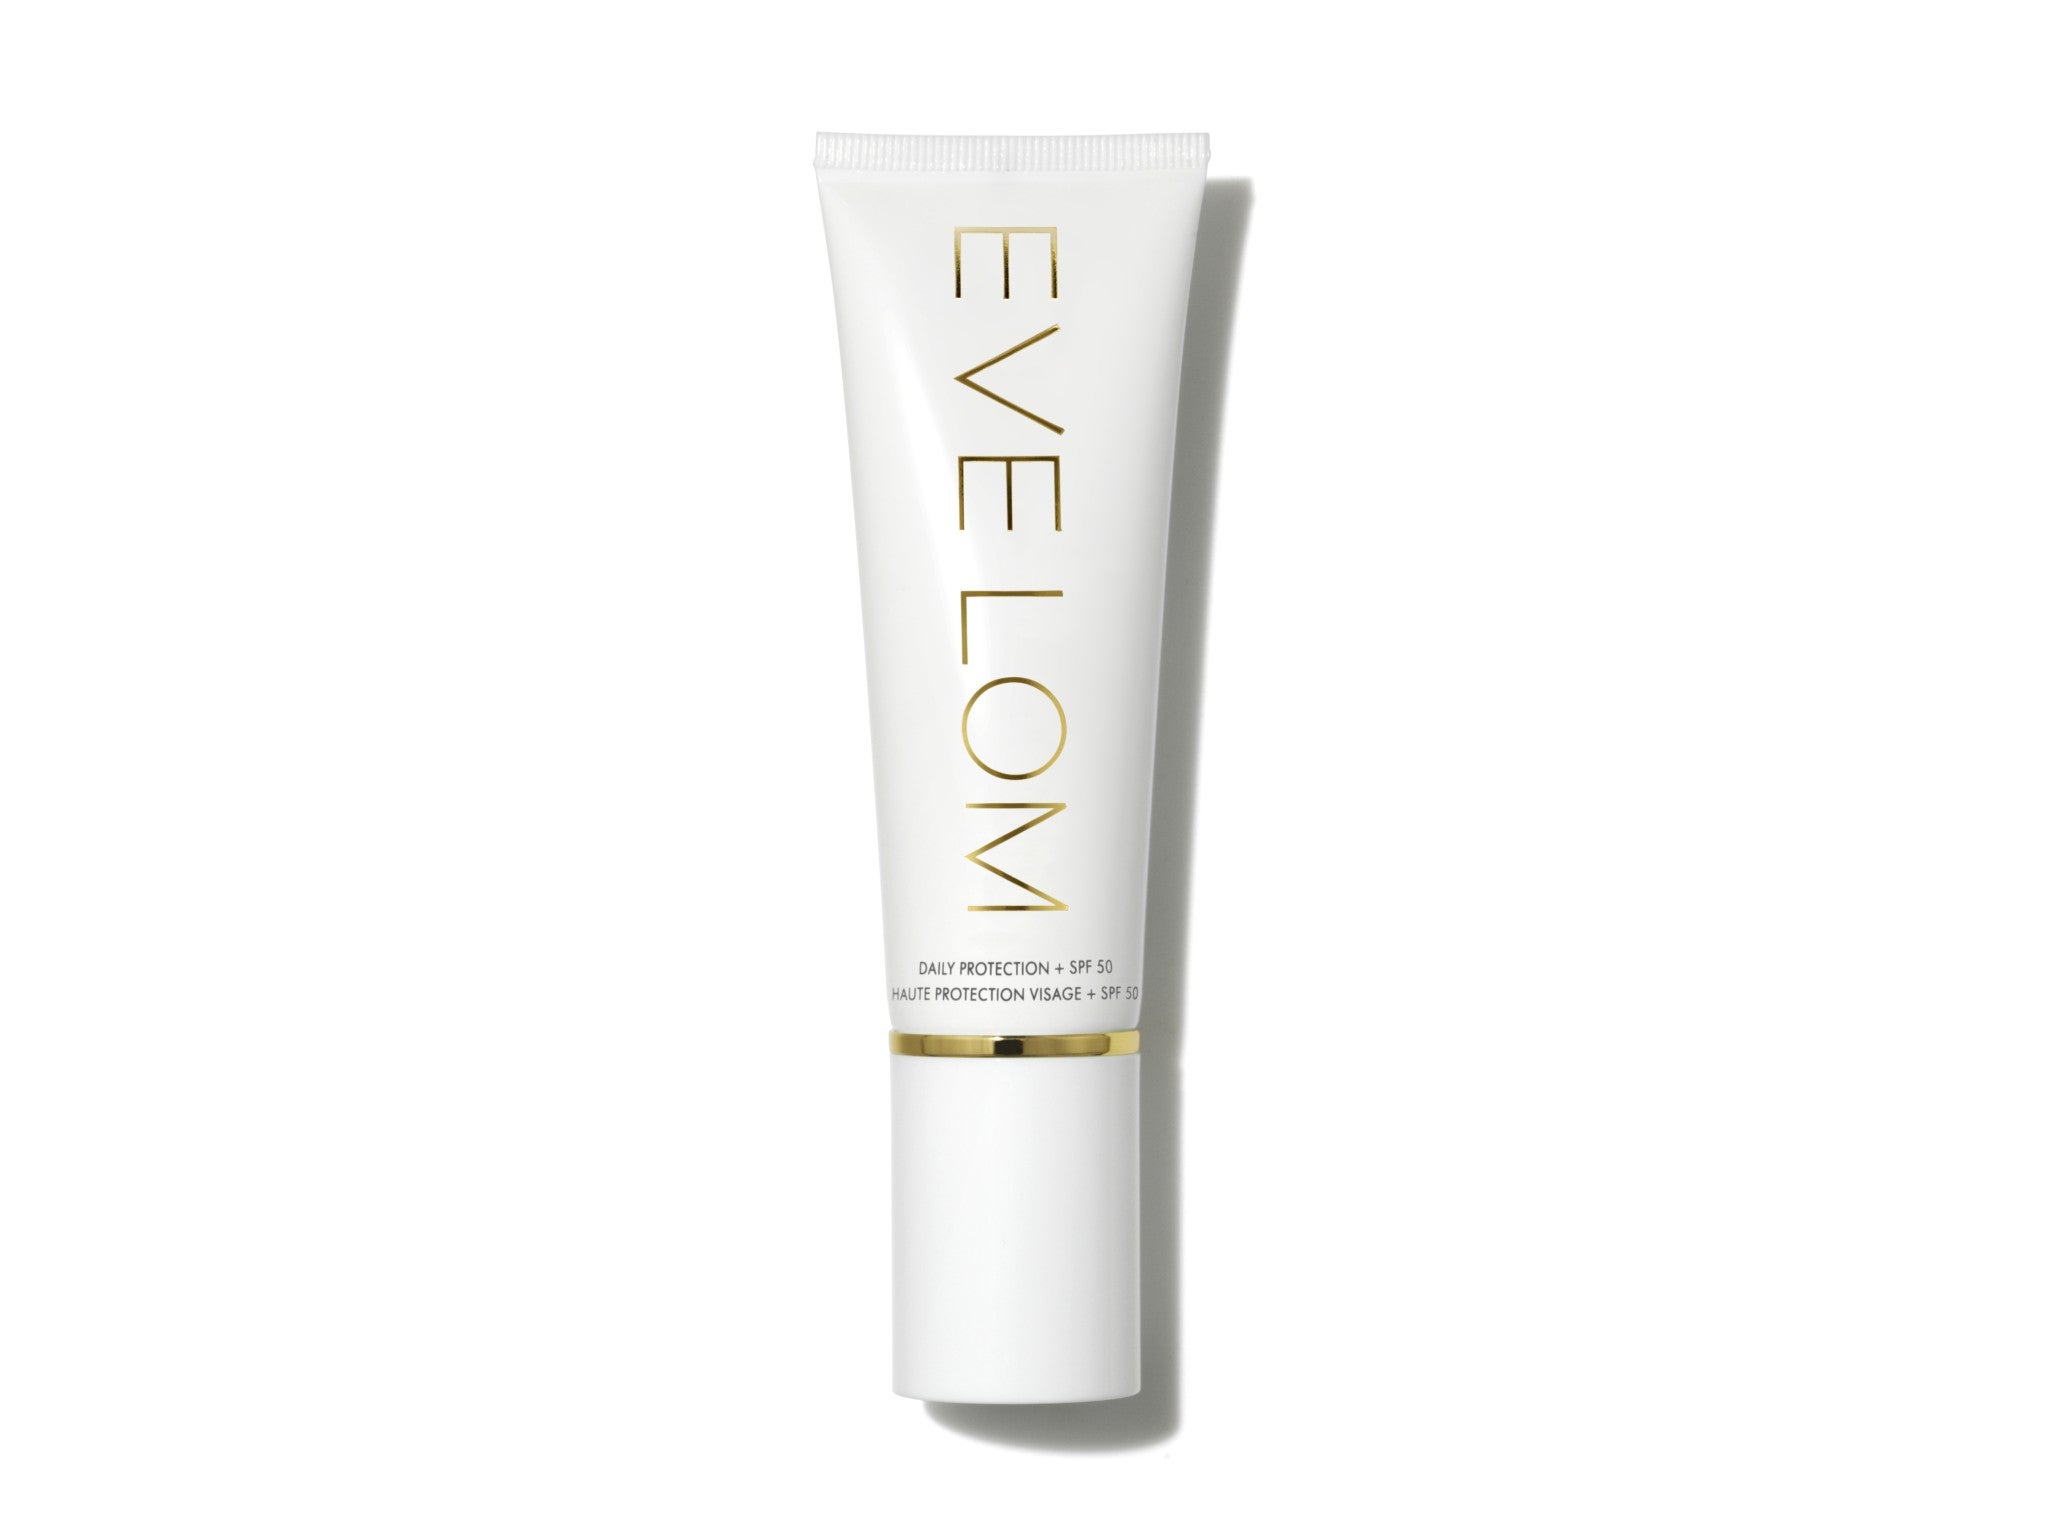 Eve Lom daily protection SPF50 indybest